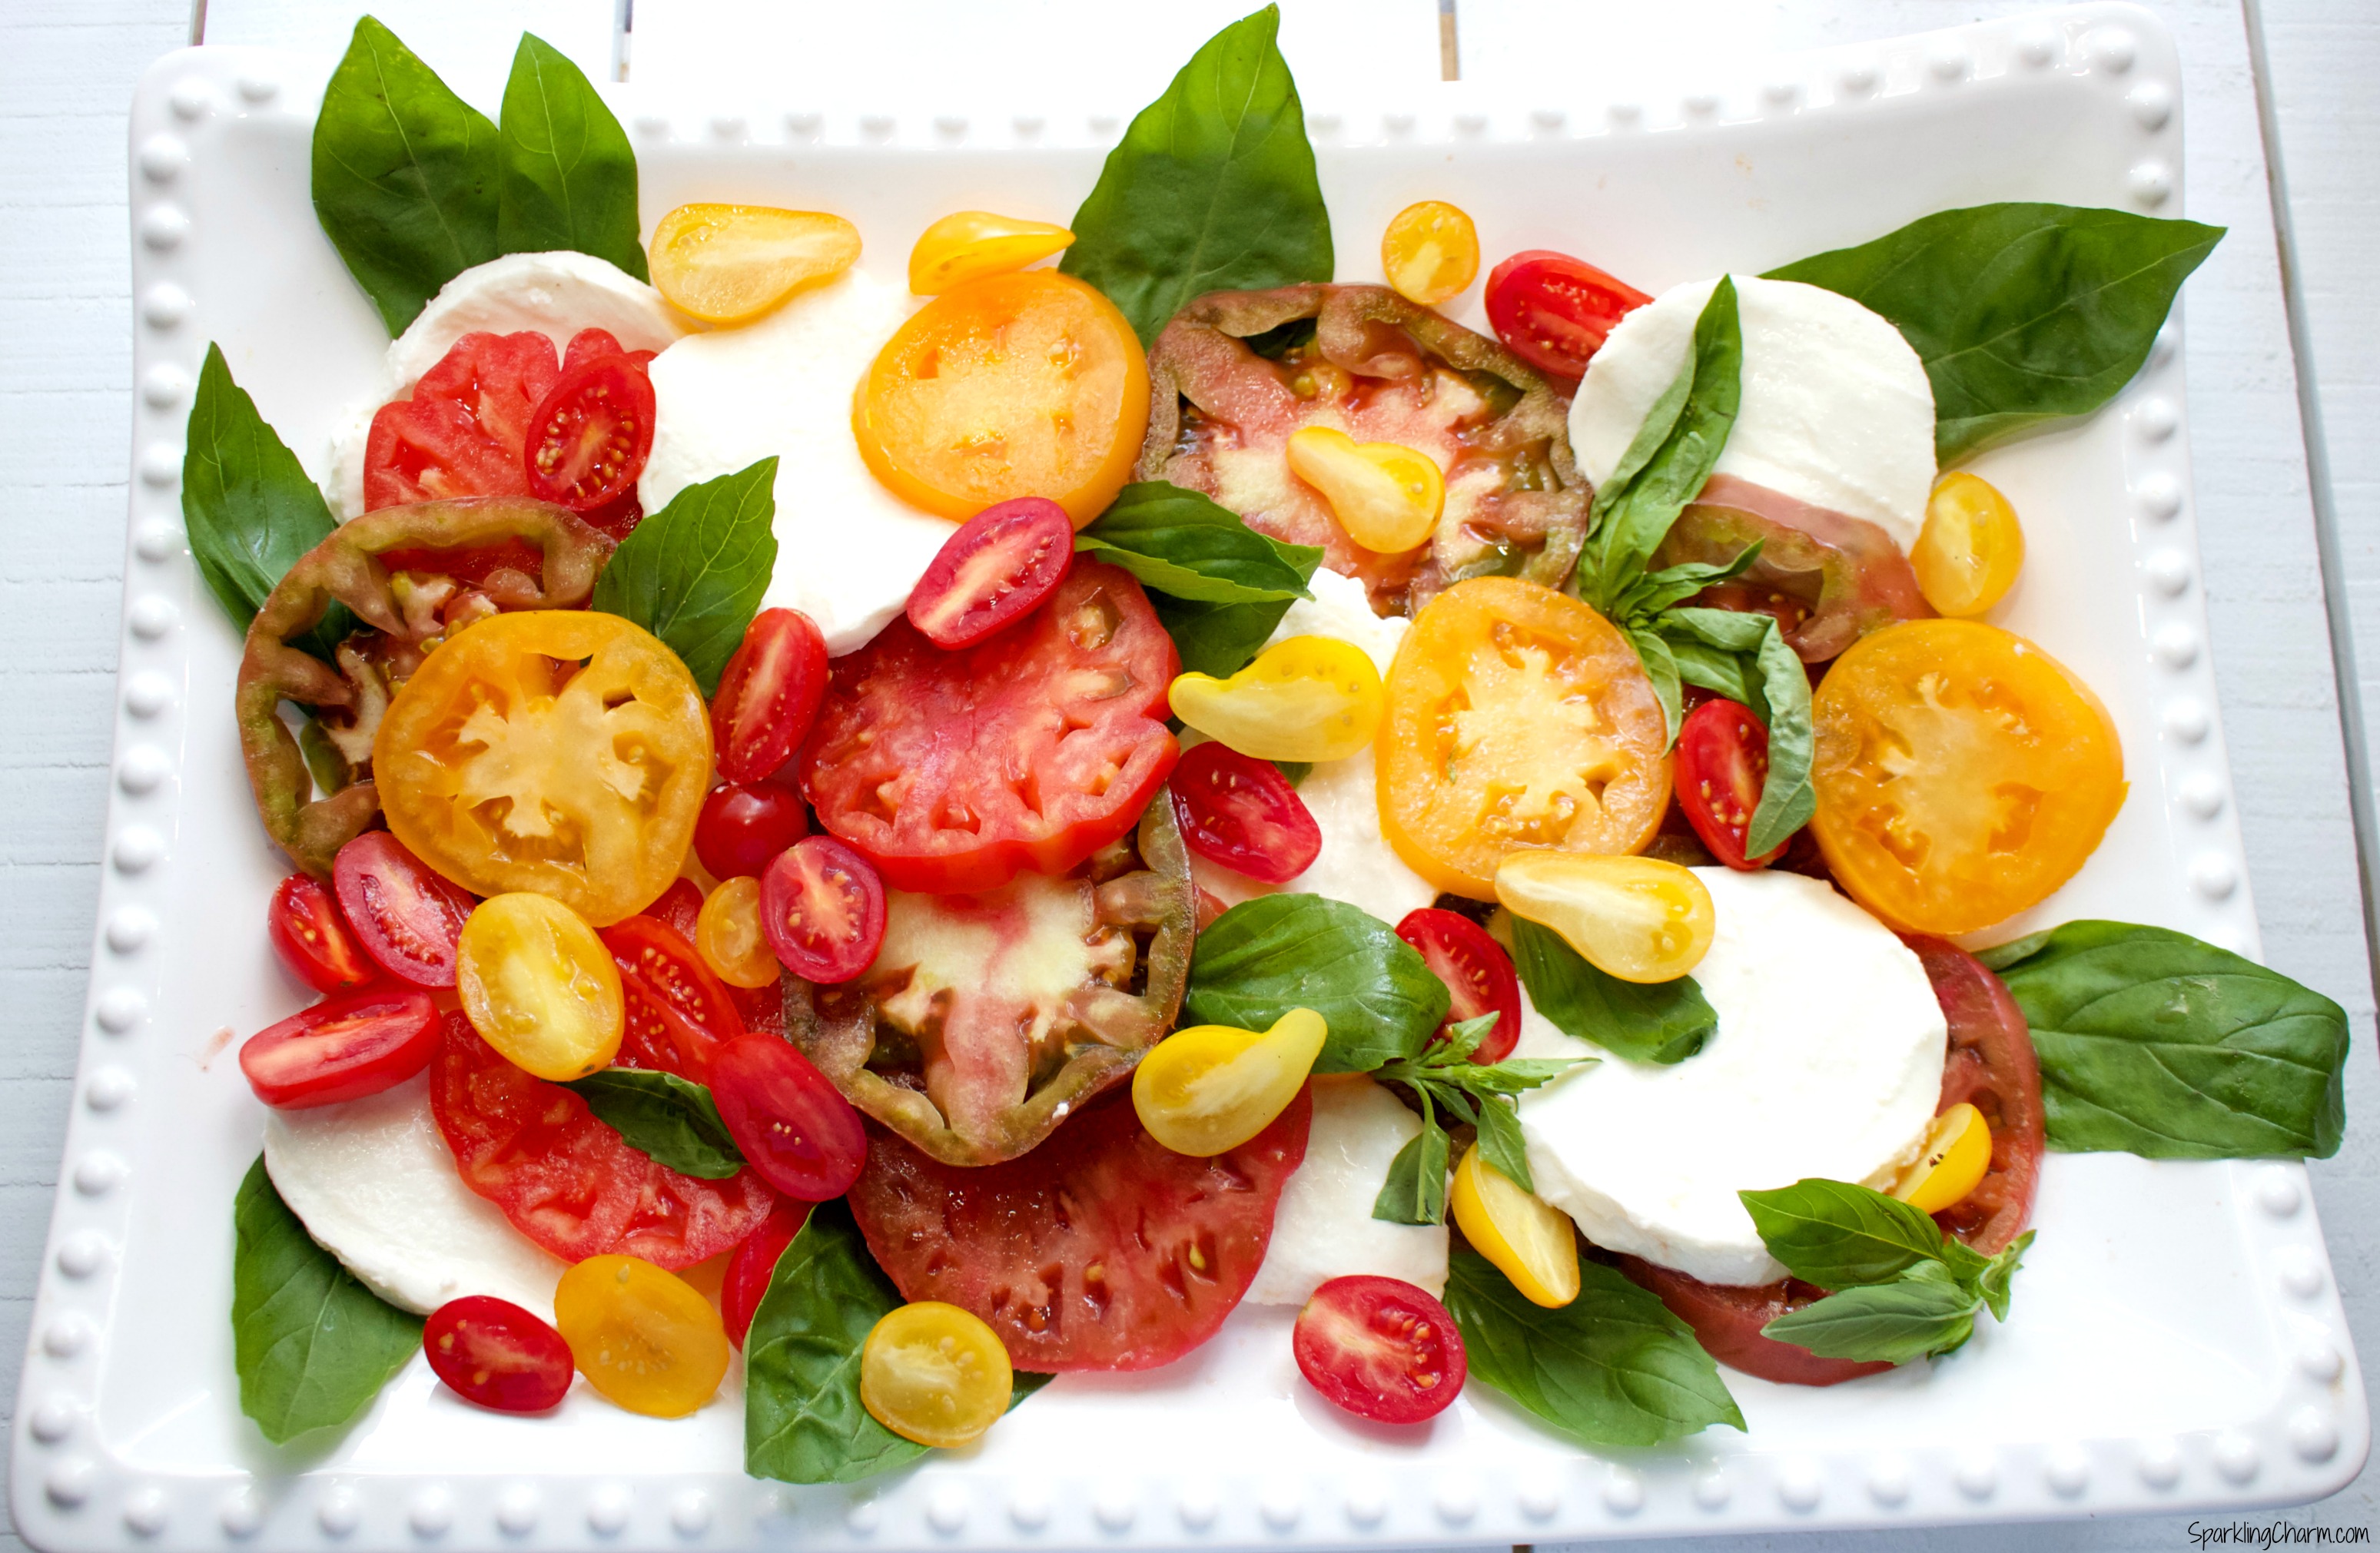 Hot Bacon Caprese Salad with Heirloom Tomatoes